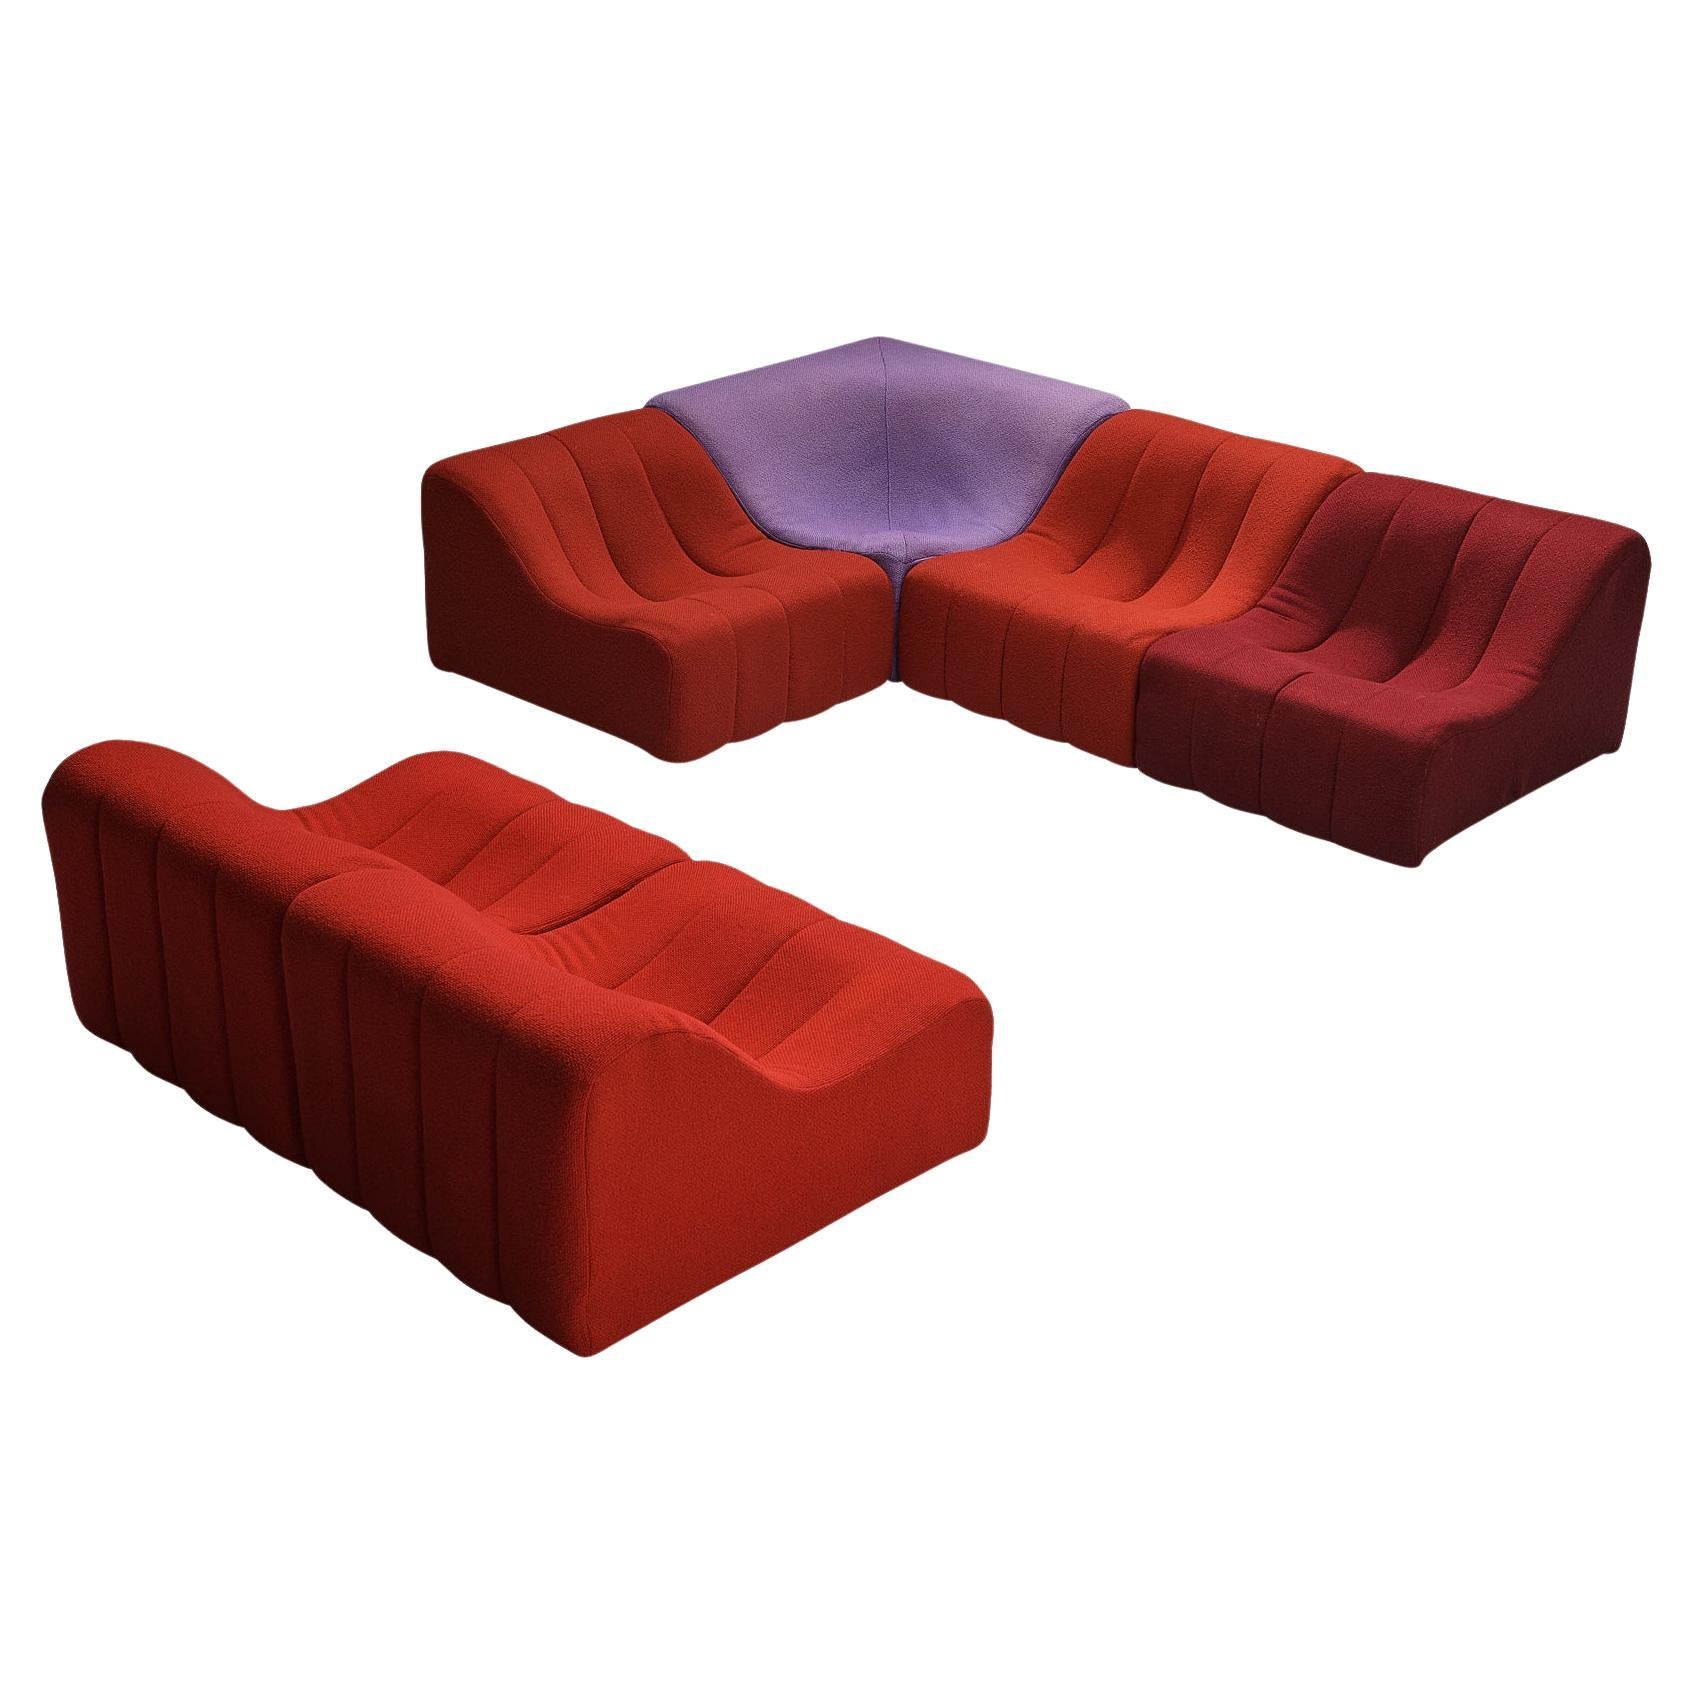 Kwok Hoi Chan for Steiner 'Chromatic' Modular Sofa in Red Purple Colors 